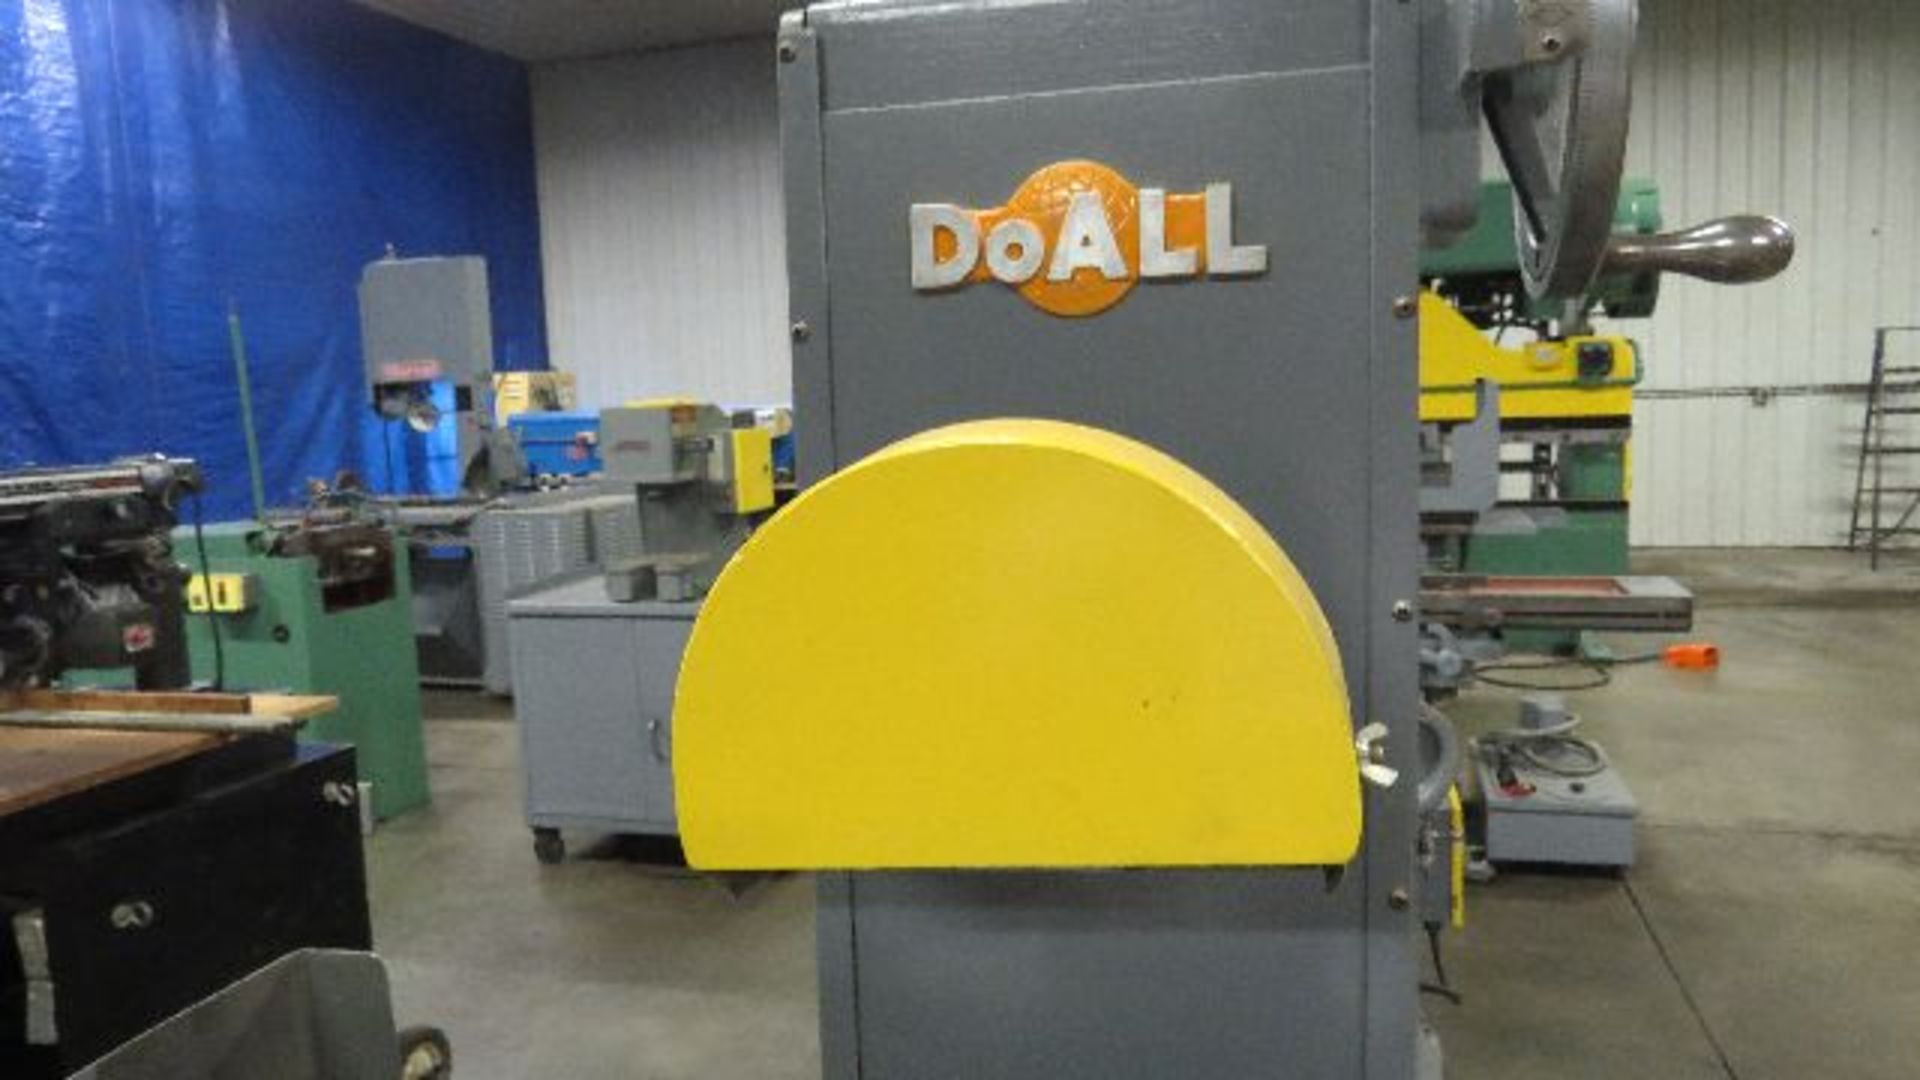 Do All Super Precision surface grinder, model DH-12, sn 138-672559, 1 hp 3/60/208/ 220/440 volot